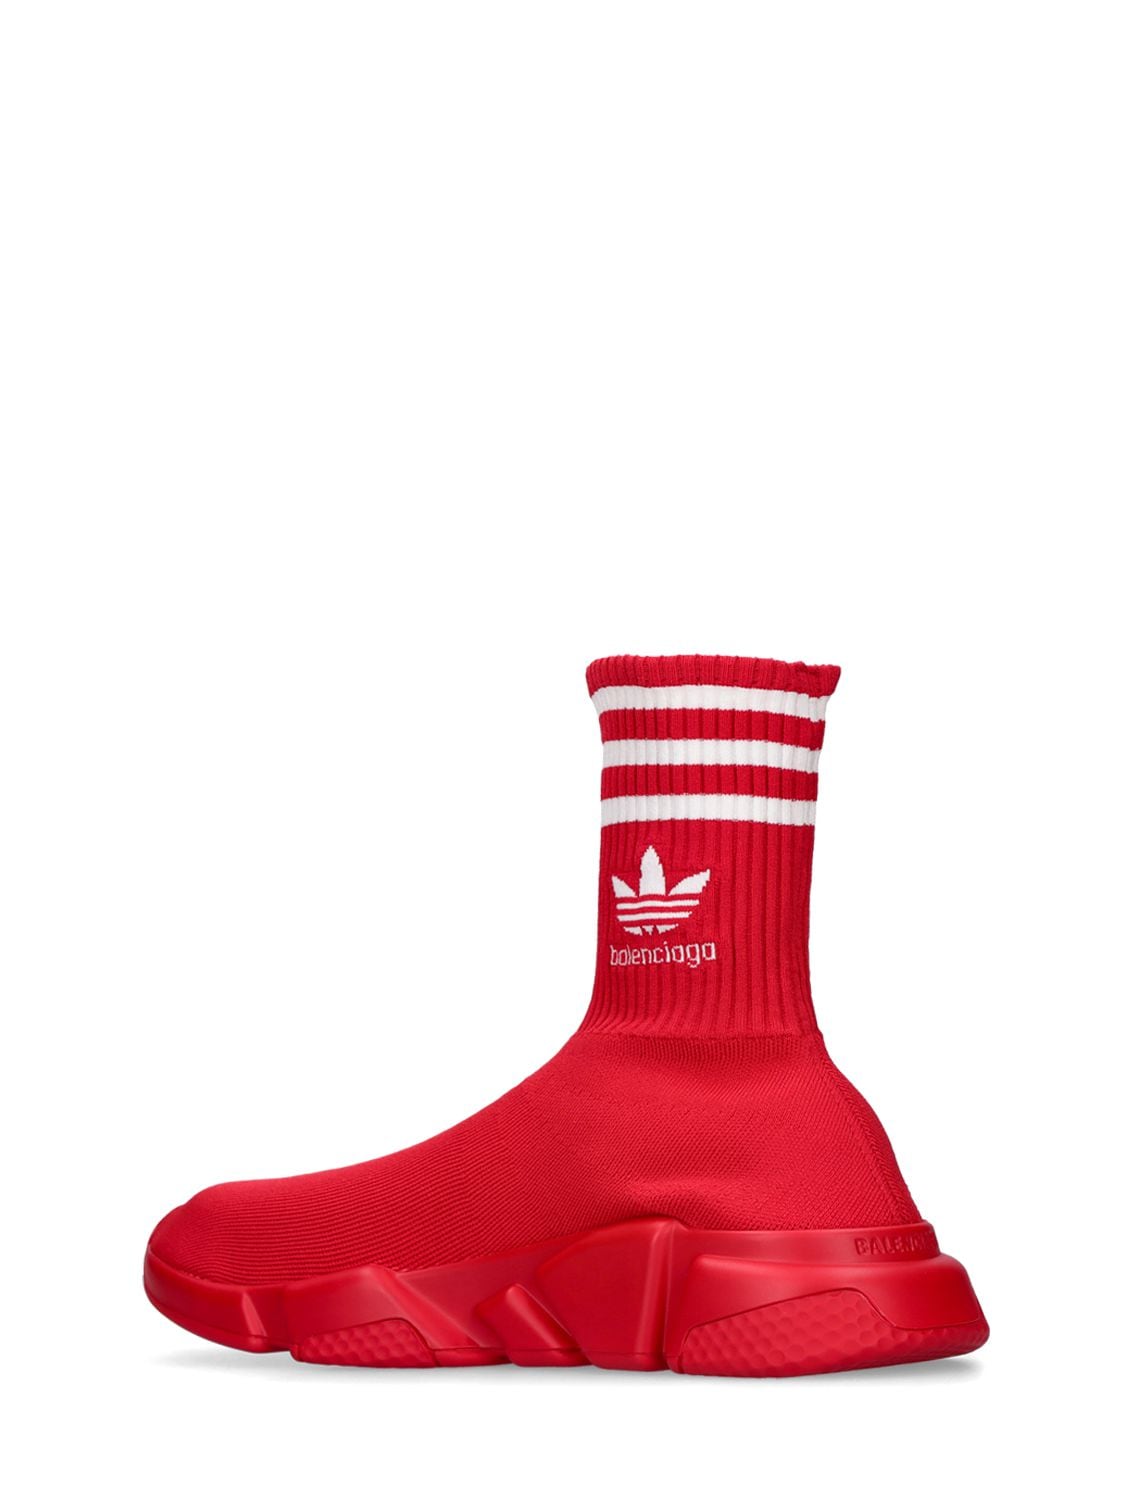 Shop Balenciaga Adidas Speed Lt Sneakers In Red,white